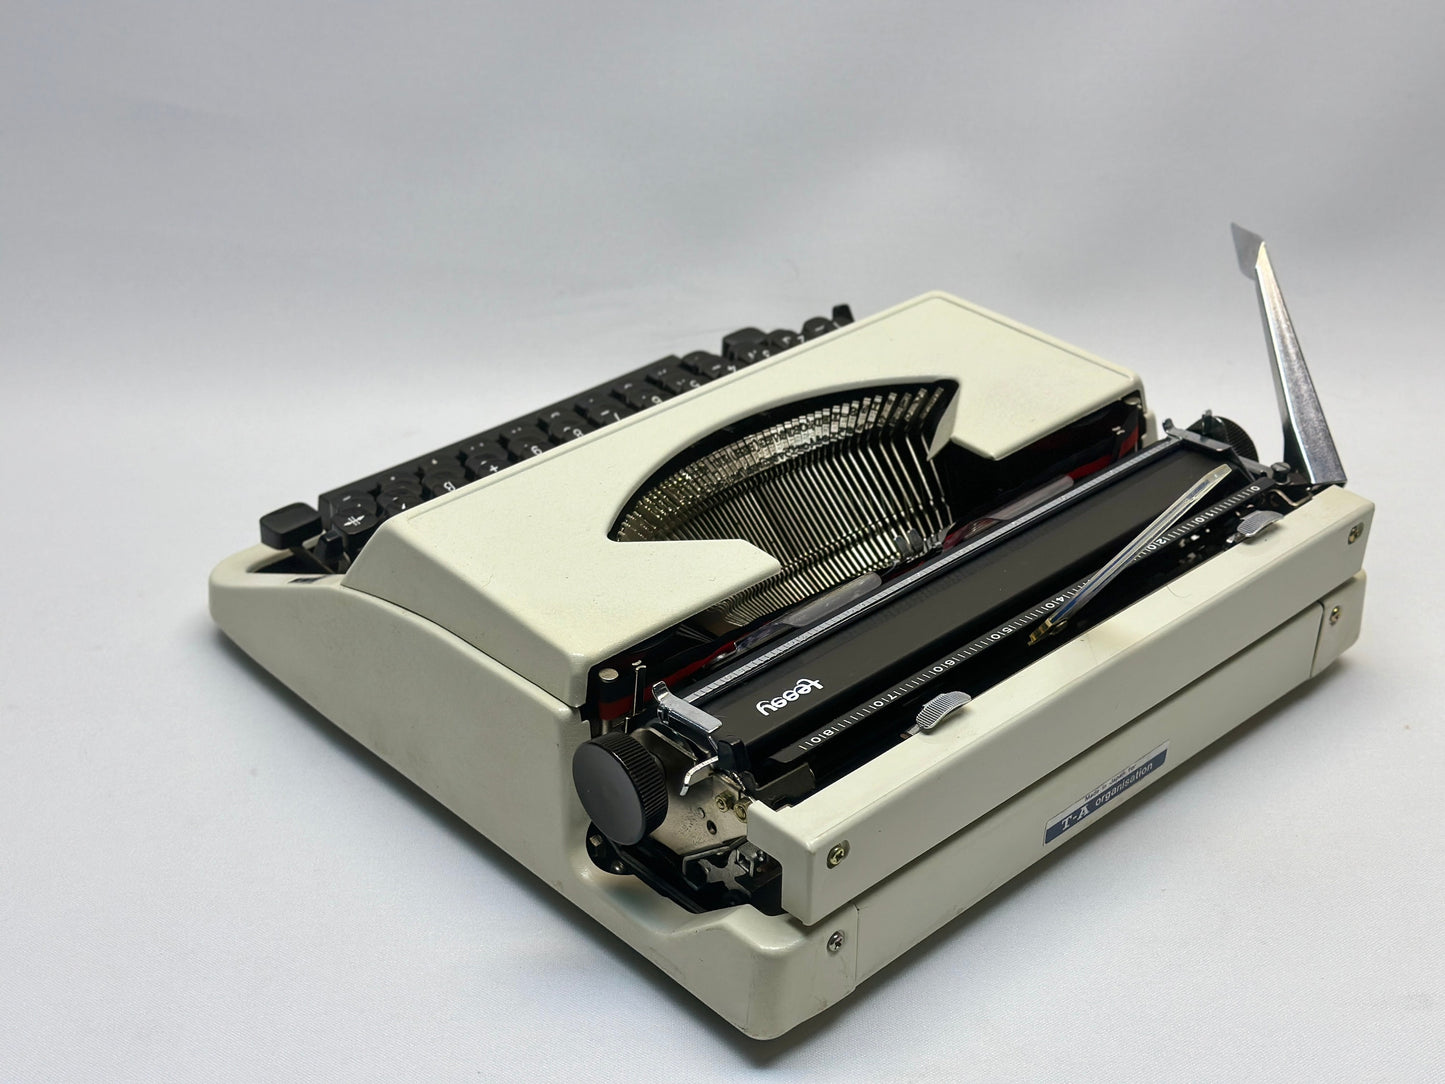 Embark on a Journey Through Time with the Triumph Typewriter - Vintage White Elegance, Black QWERTZ Keyboard, Antique Gift